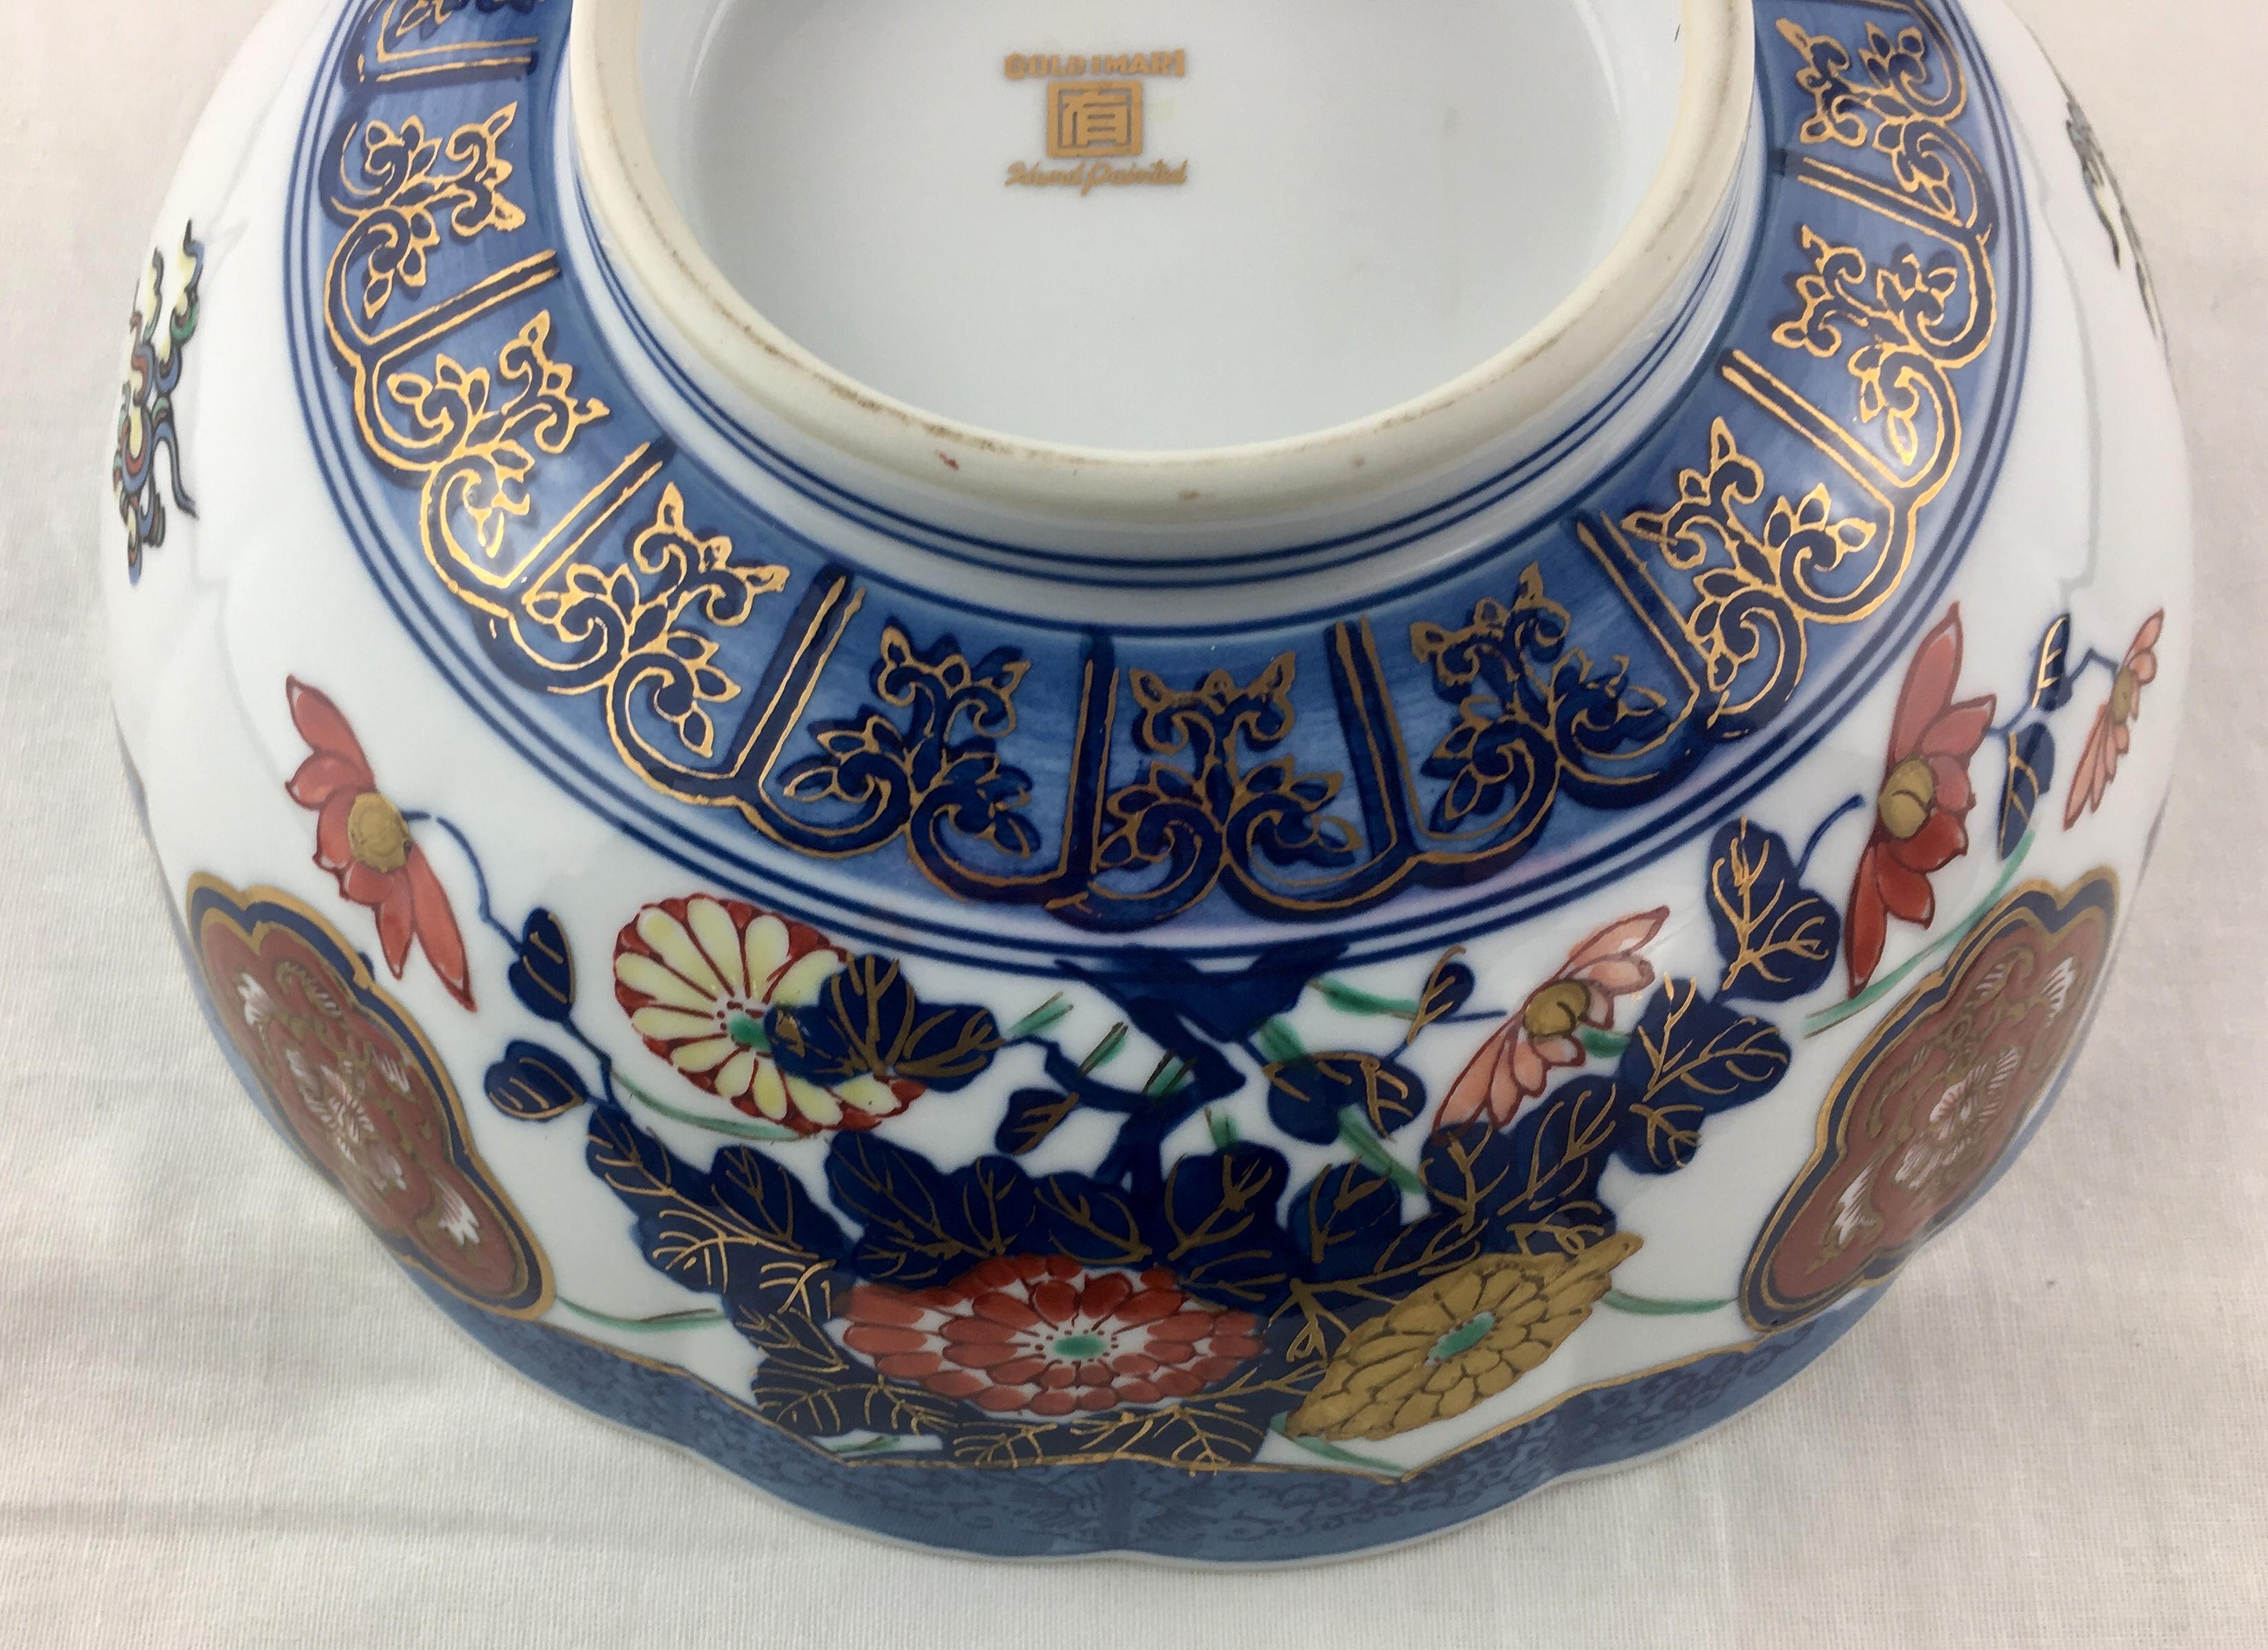 A Japanese Imari hand painted porcelain bowl possibly for presenting cooked rice at a celebration. It appears to be styled after a sushi oke, a wooden tub used in the preparation of sushi rice. 

This beautiful bowl is thickly painted and quite